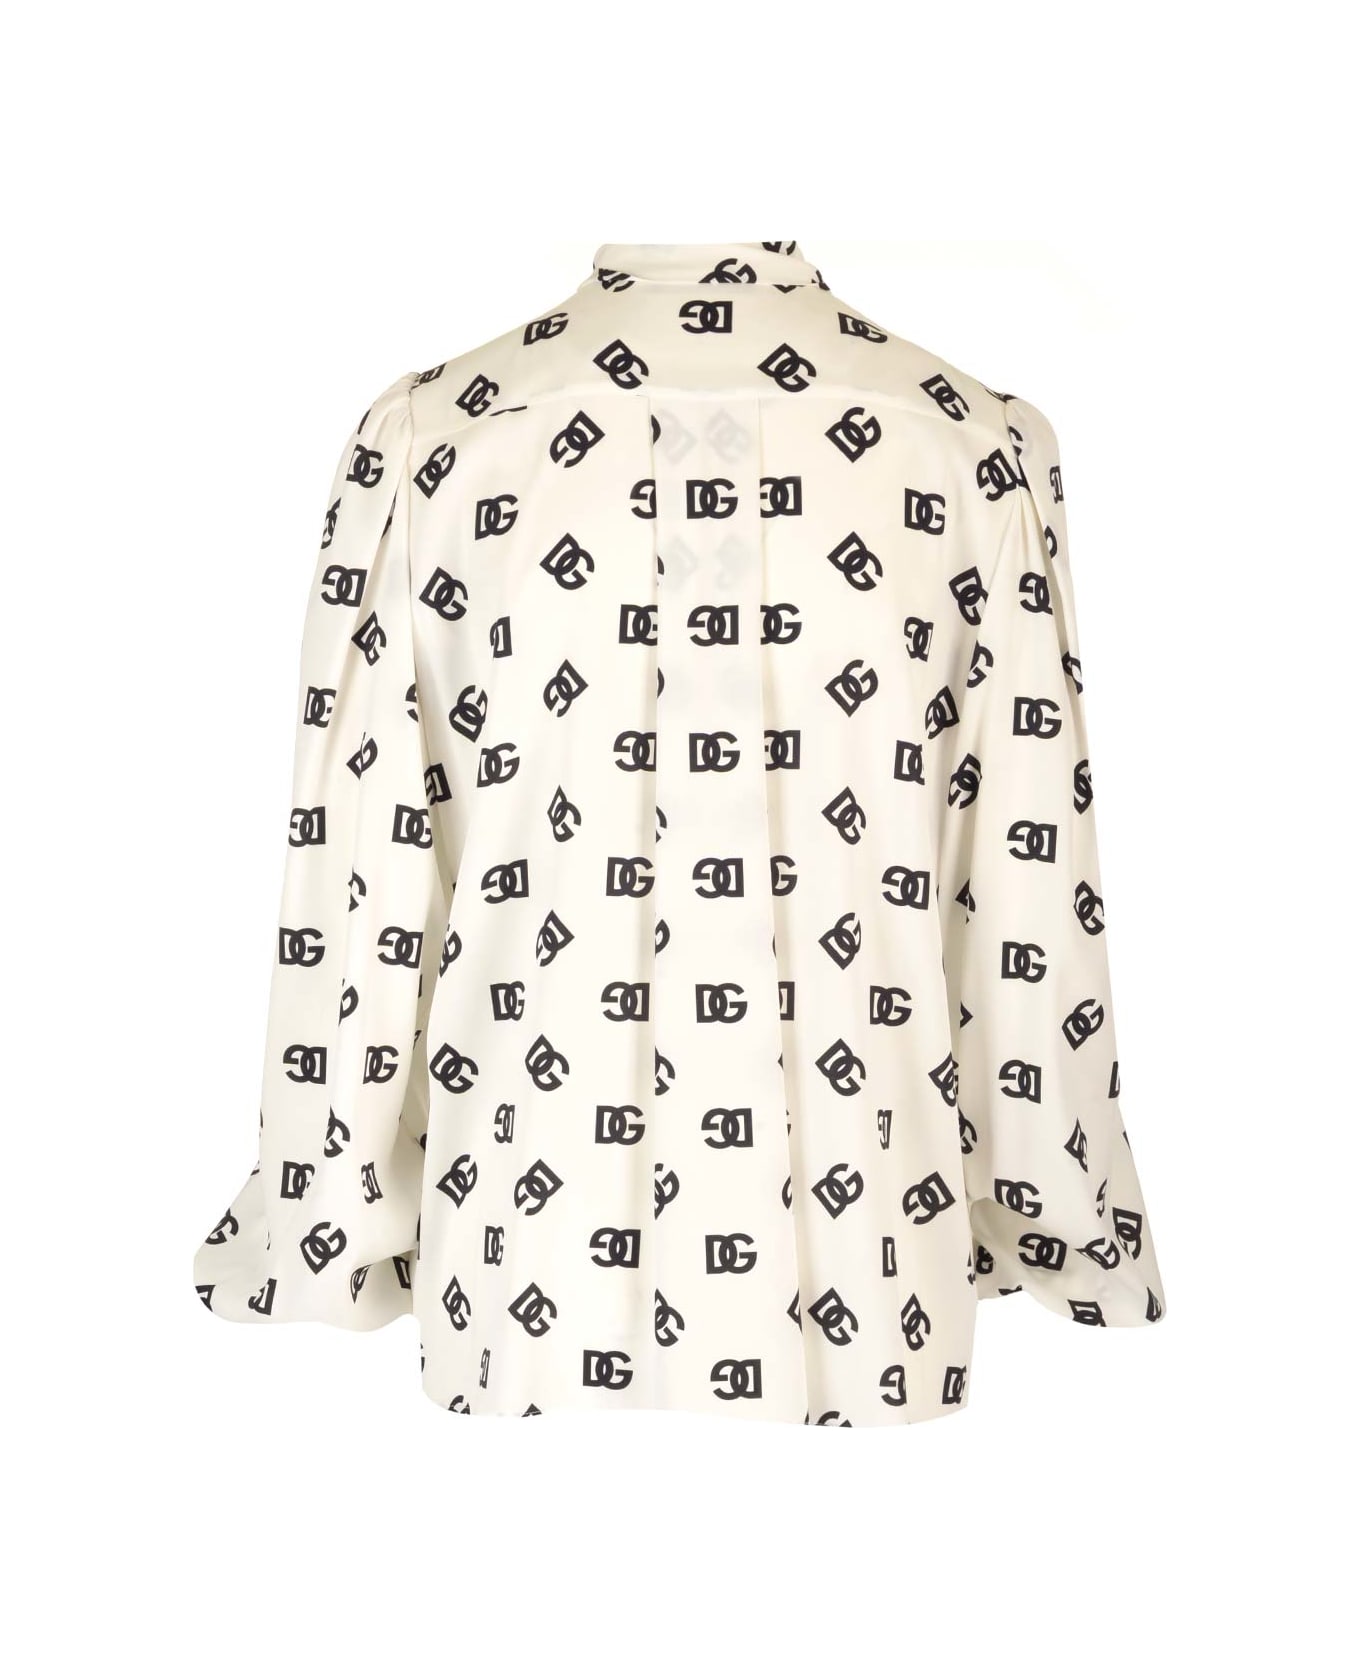 Dolce & Gabbana Shirt With All-over Dg Print - White